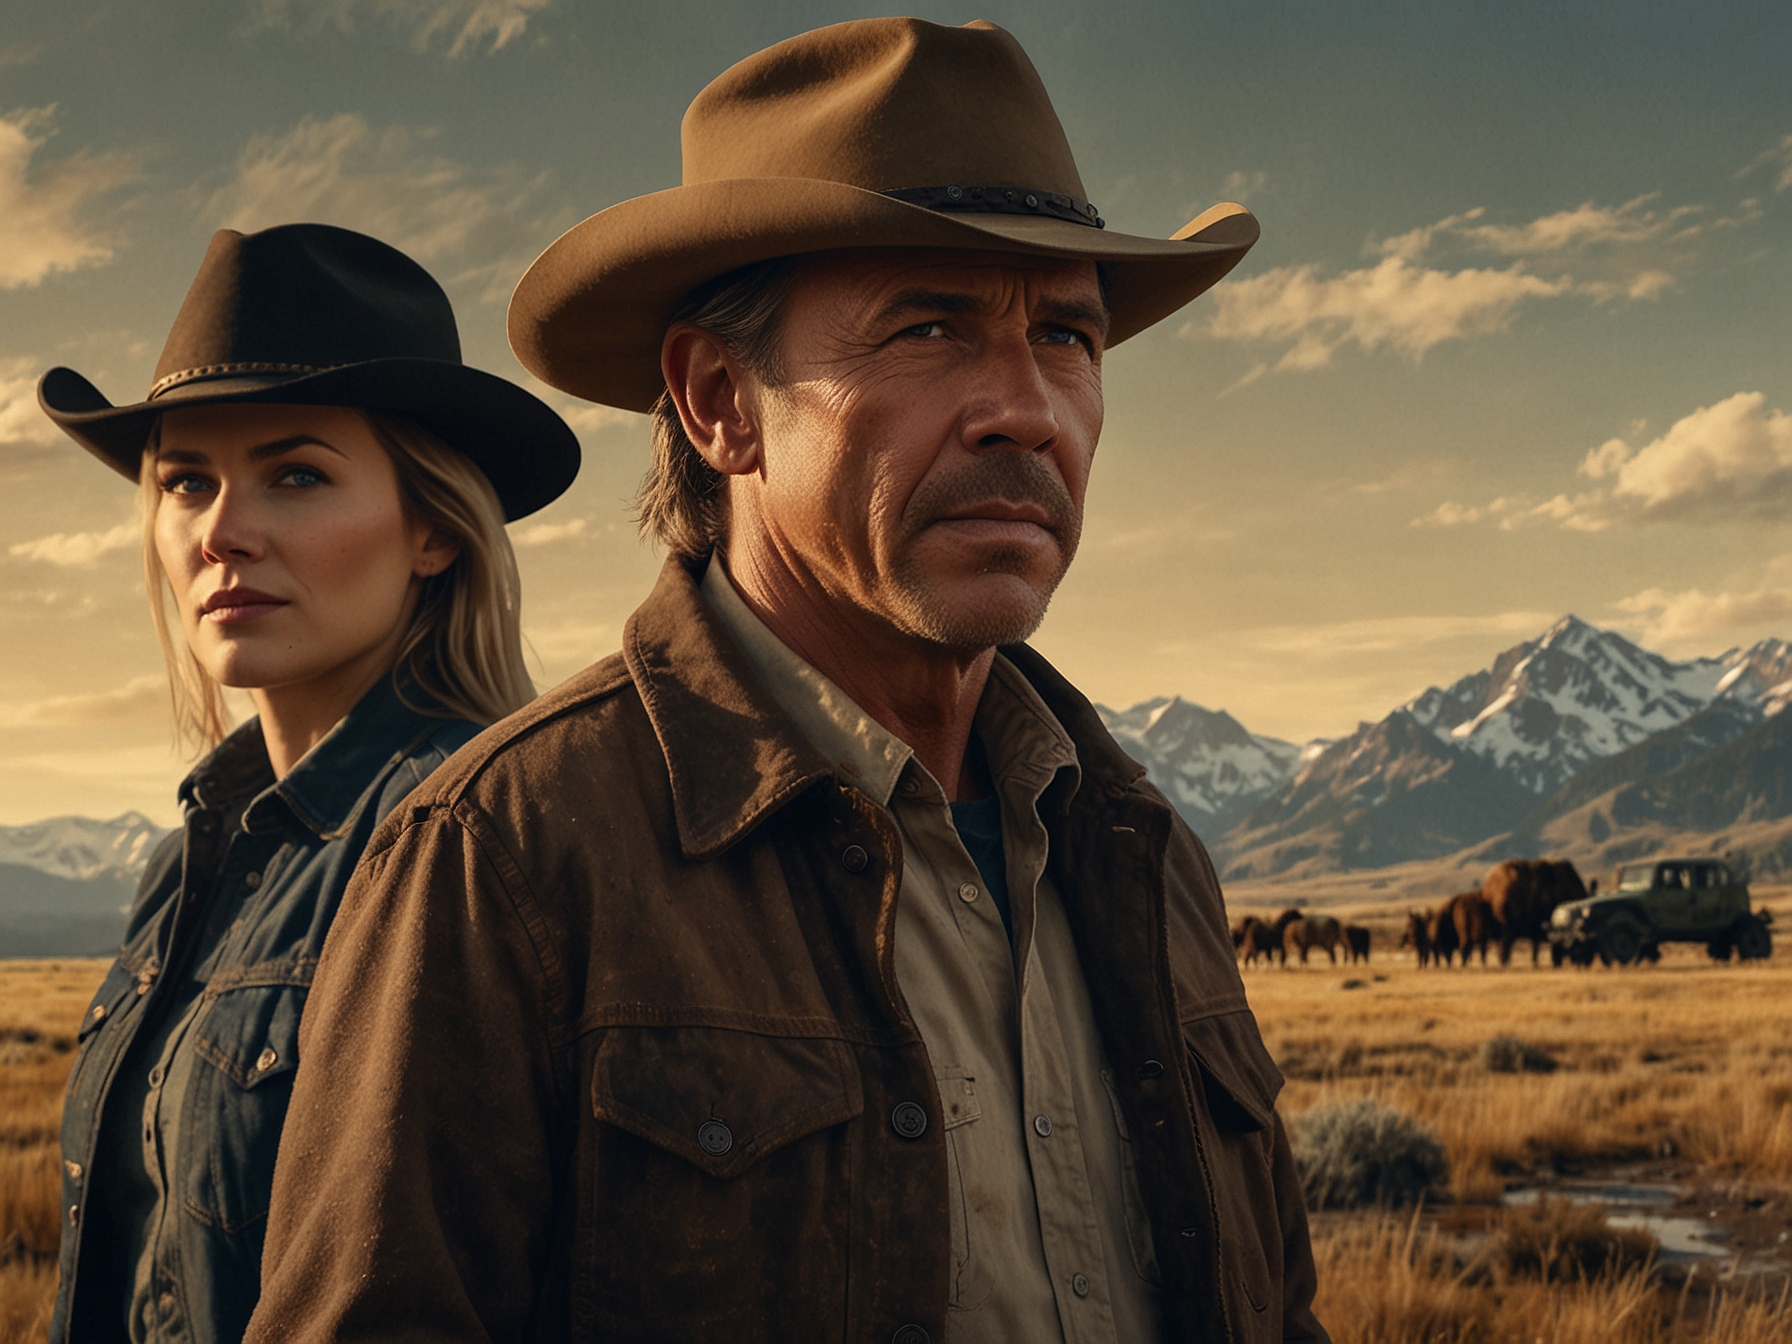 The main cast of 'Yellowstone', including Kevin Costner as John Dutton, standing together with the rugged Montana backdrop, highlighting their intense and complex relationships.